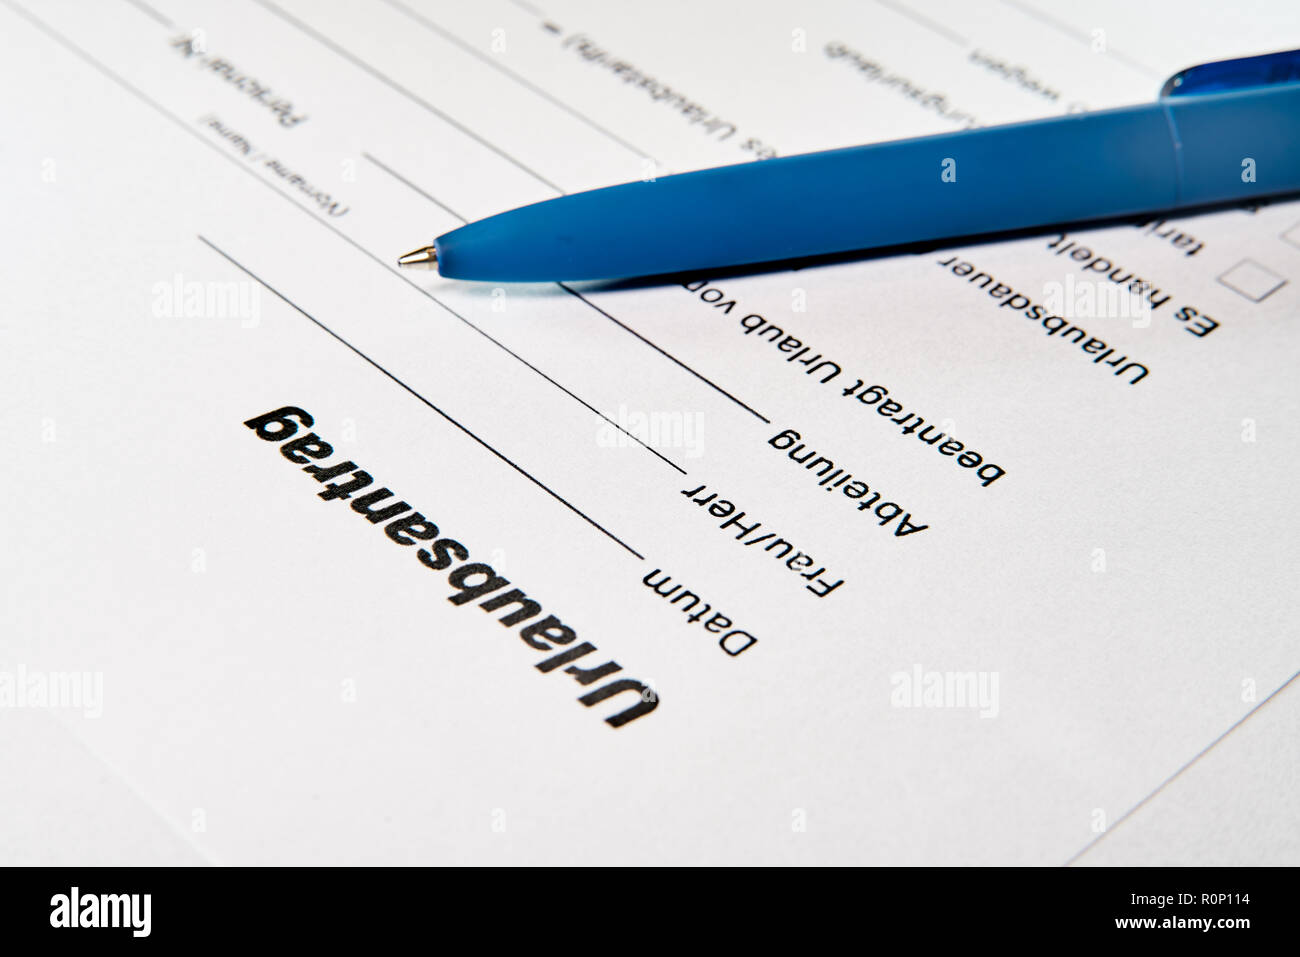 Application for leave of a worker on a table Stock Photo